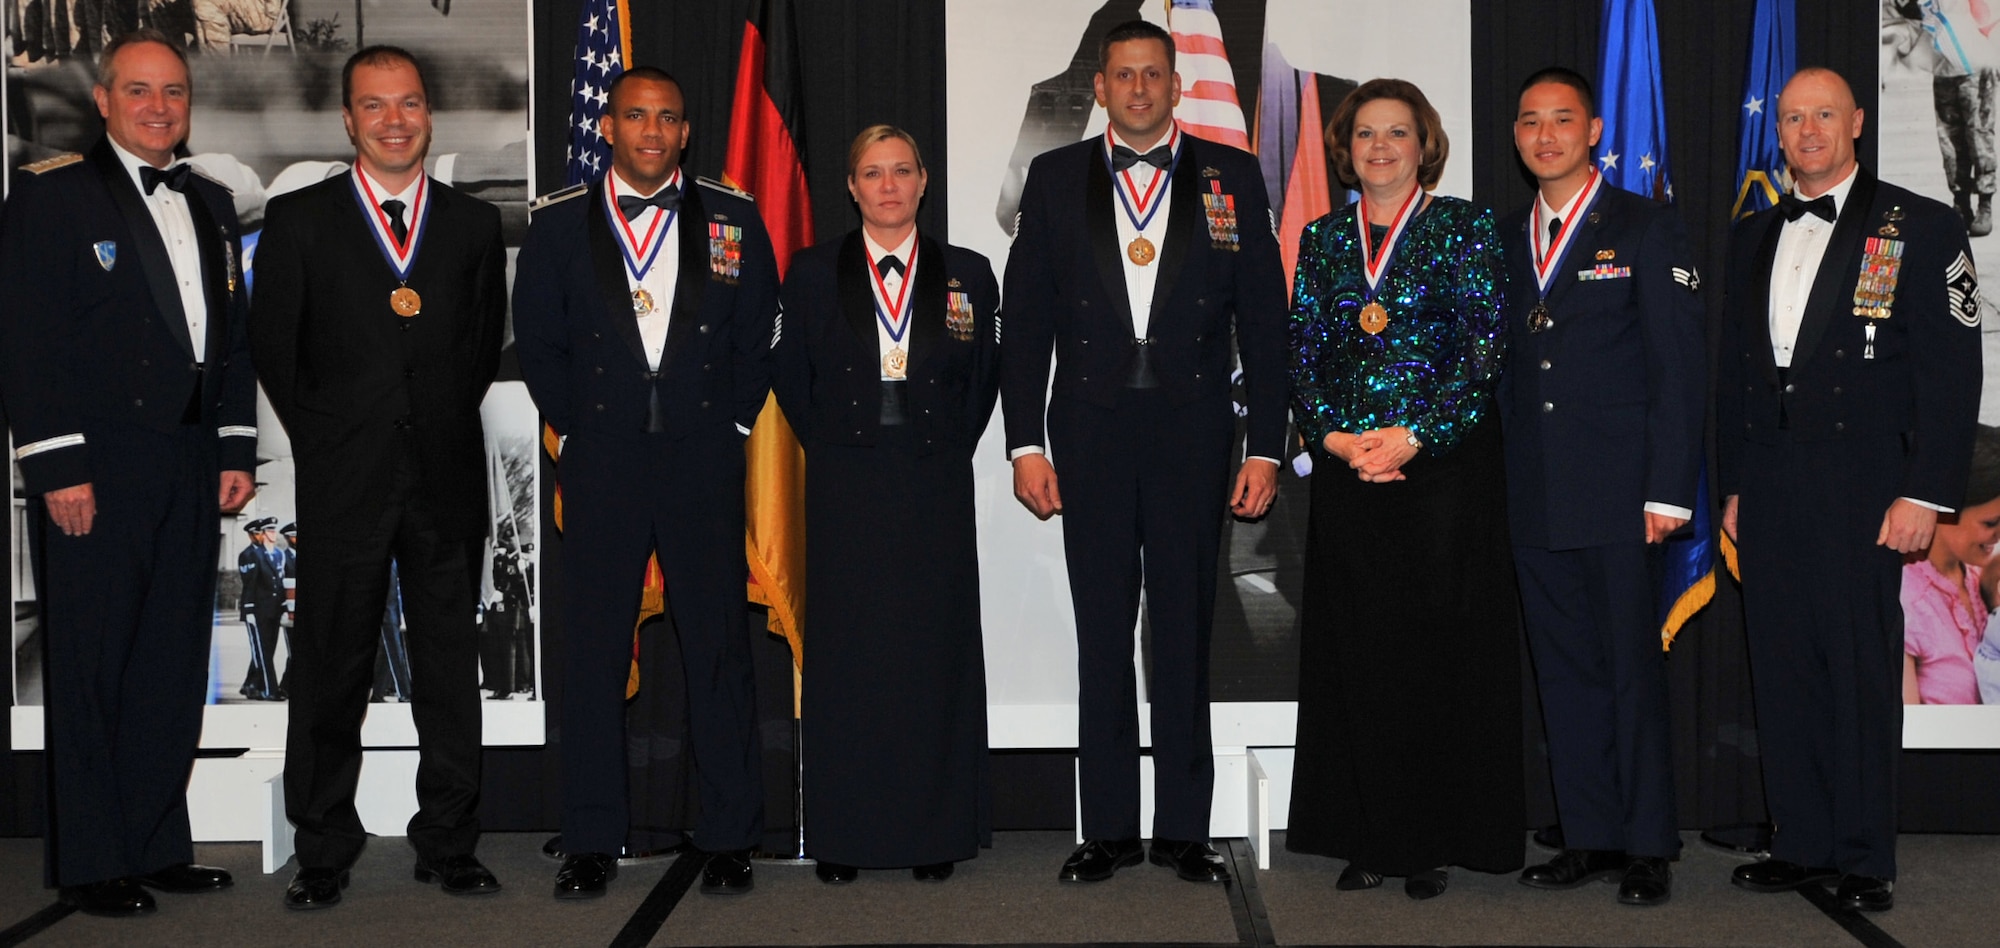 The annual awards winner pose for a photo with Gen. Mark A. Welsh III, U.S. Air Forces in Europe commander (far left), and Chief Master Sgt. Dave Williamson, USAFE command chief master sergeant (far right). The winners pictured are: Eren Ersoy, 39th Air Base Wing, Incirlik Air Base, Turkey; Capt. Gilbert Wyche, Master Sgt. Kathleen Ross and Tech. Sgt. Dustin Goodwin, 48th Fighter Wing, RAF Lakenheath, United Kingdom; and Theresa Vannier, 3rd Air Force and Senior Airman Johnny Nguyen, 86th Airlift Wing, Ramstein Air Base, Germany.  (U.S. Air Force photo by Senior Airman Caleb Pierce/Released)